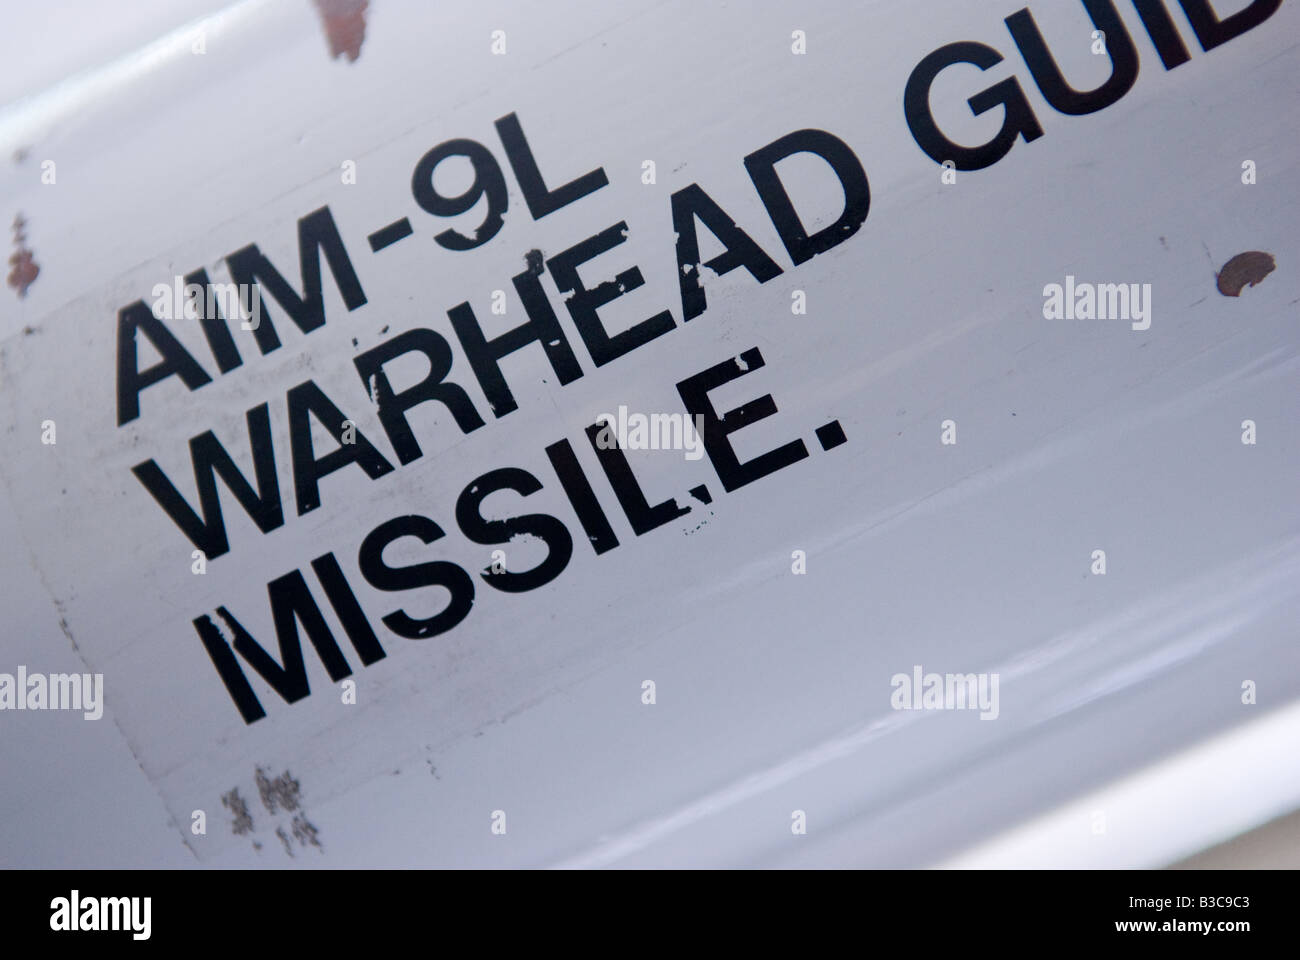 Guided Missile casing Stock Photo